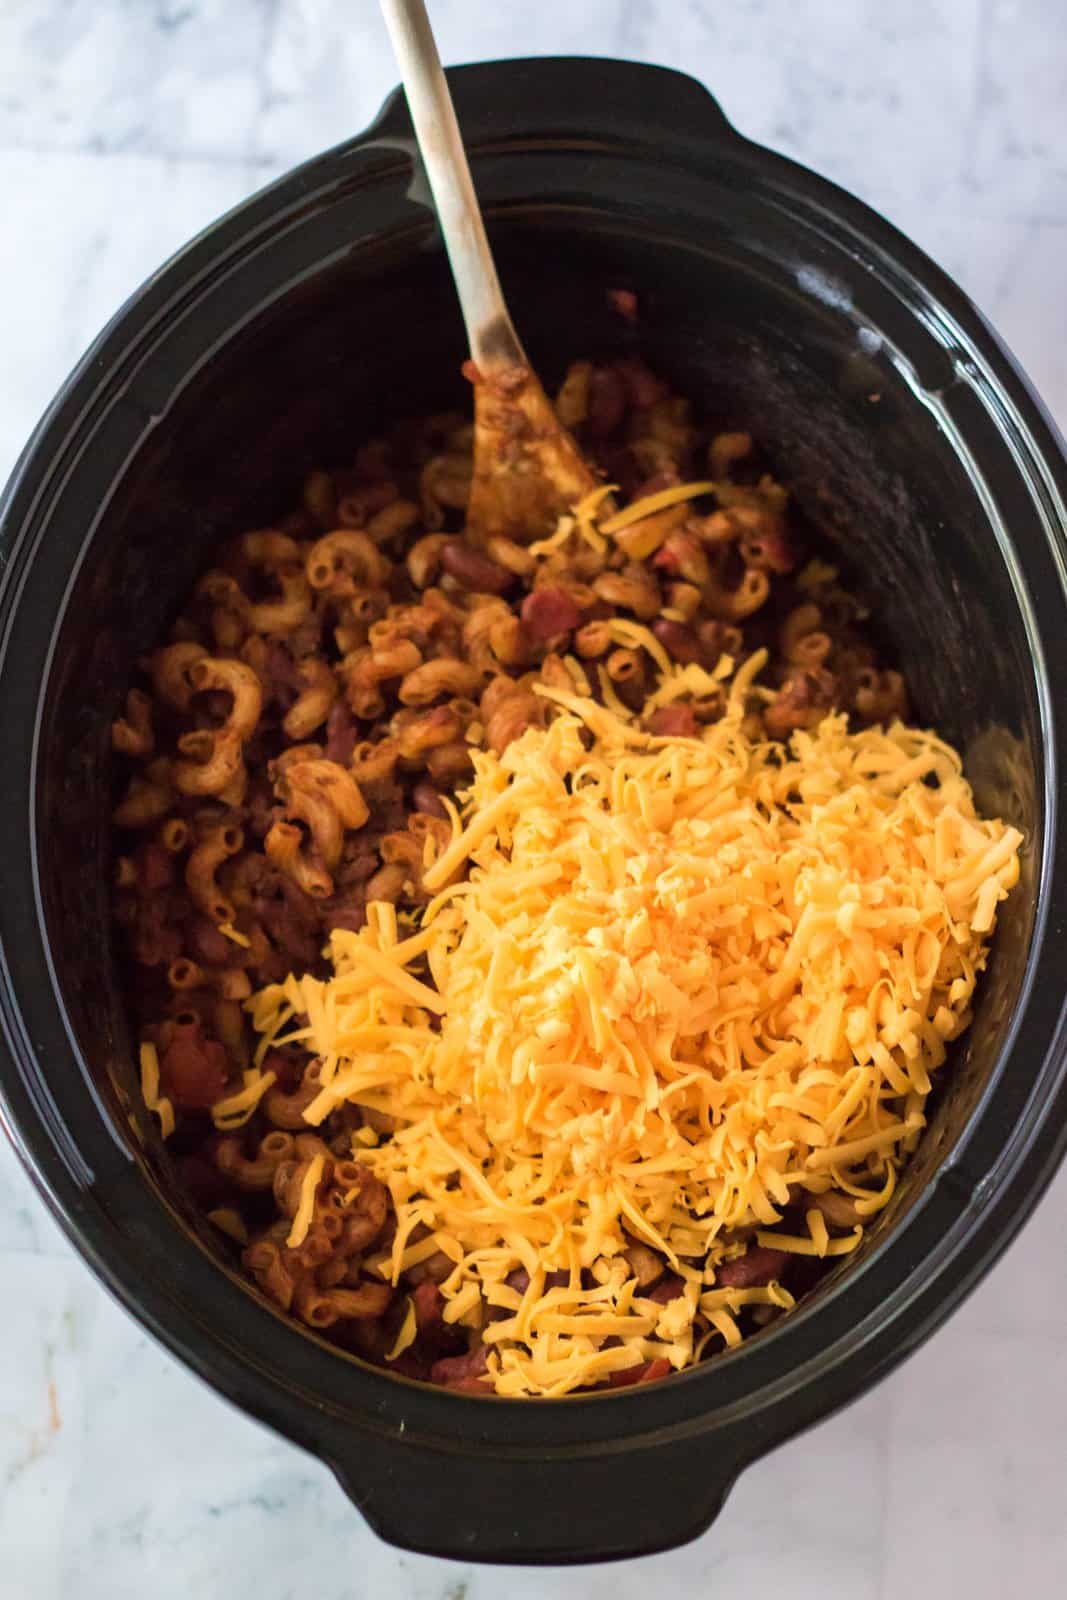 Half the shredded cheese added to slow cooker.